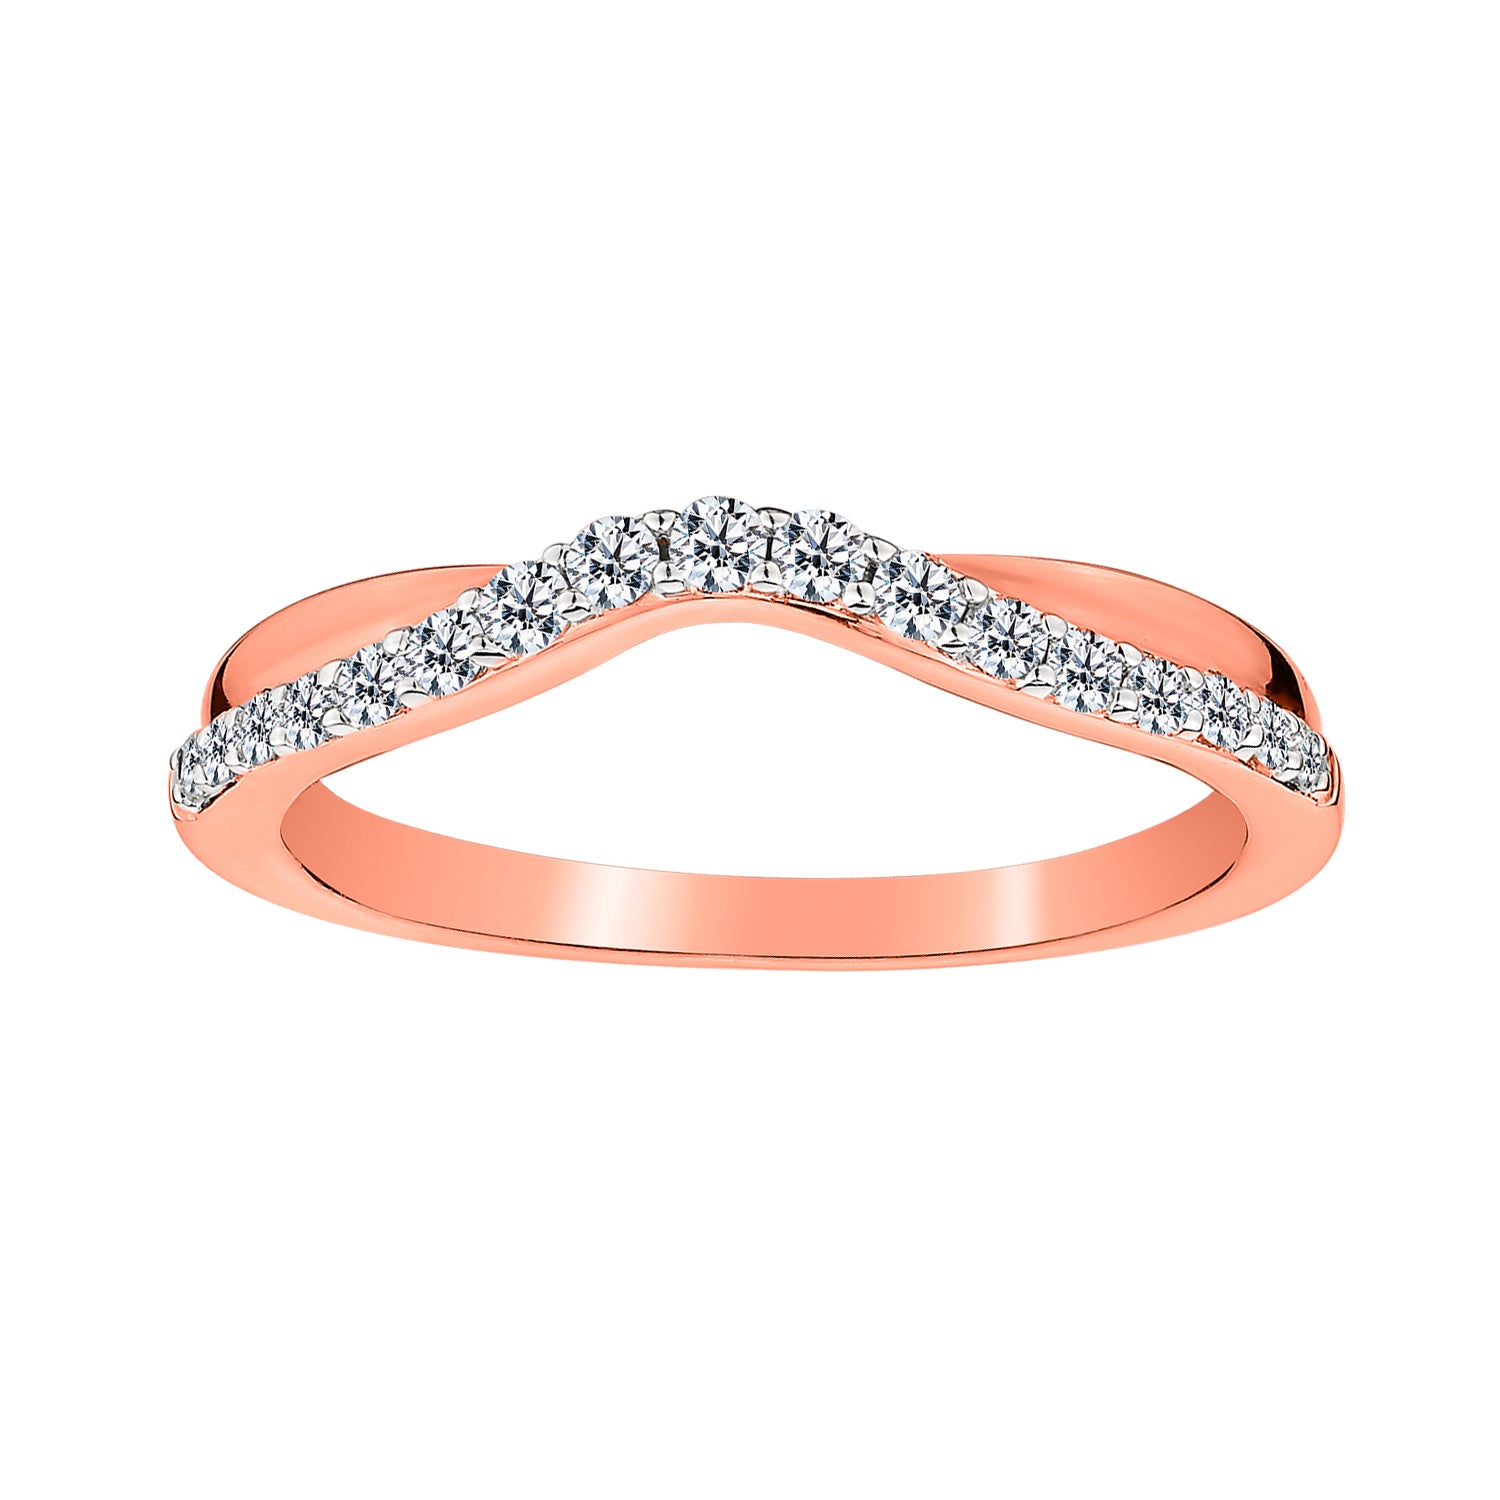 .25 Carat Diamond Ring,  14kt Rose Gold. Fashion Rings. Griffin Jewellery Designs